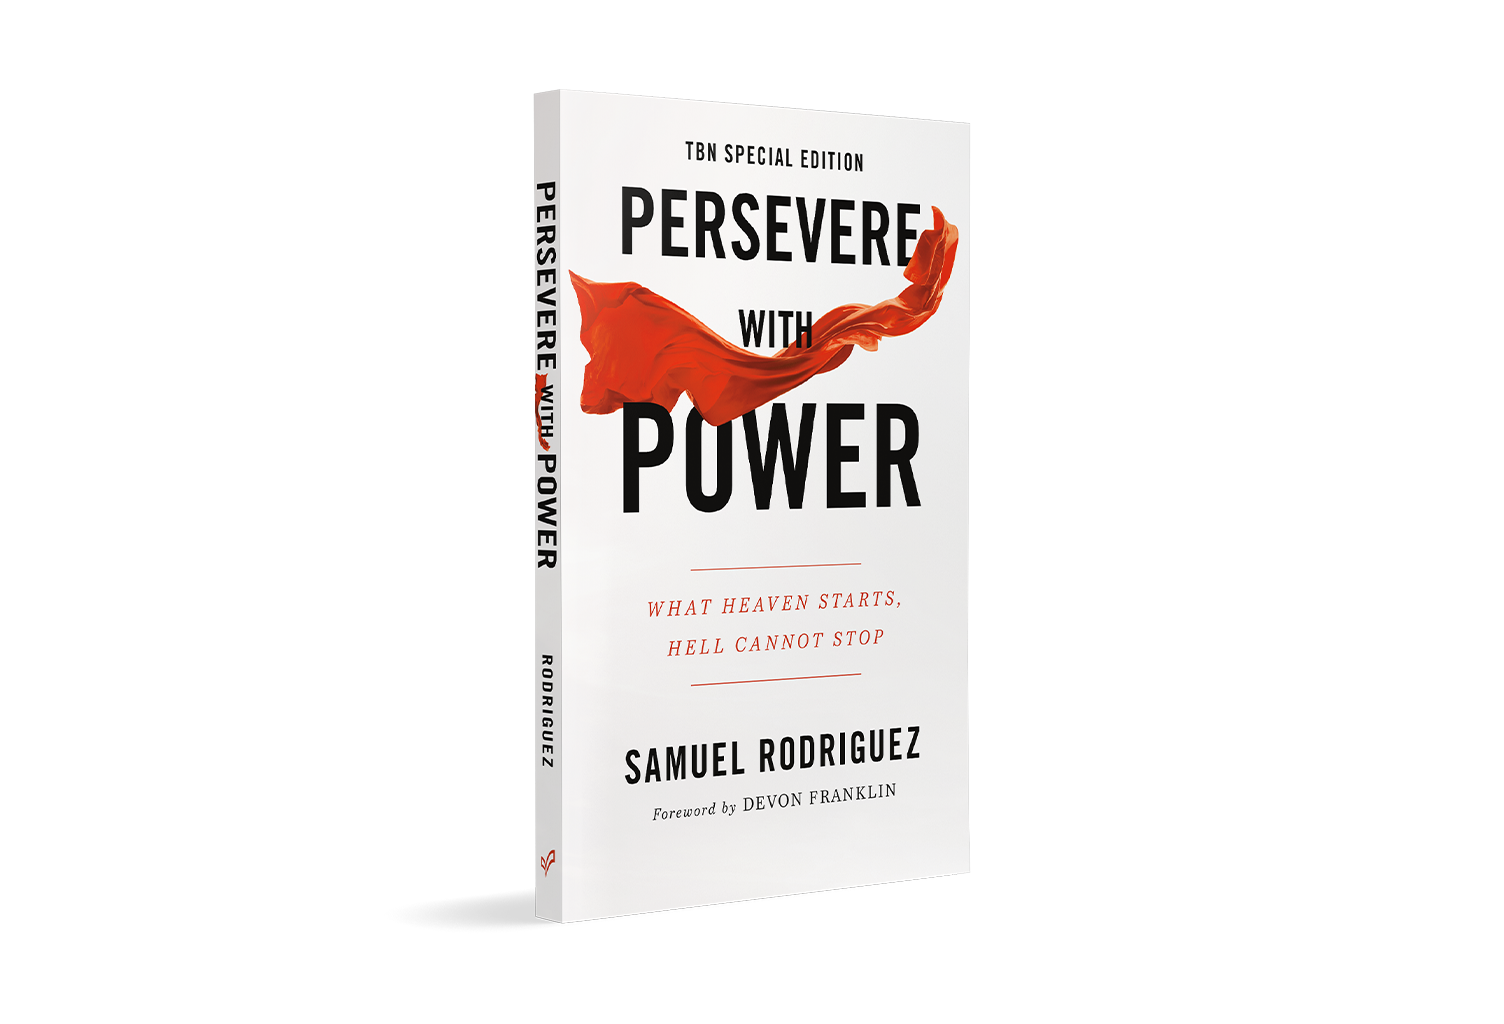 Persevere With Power, by Samuel Rodriguez on TBN